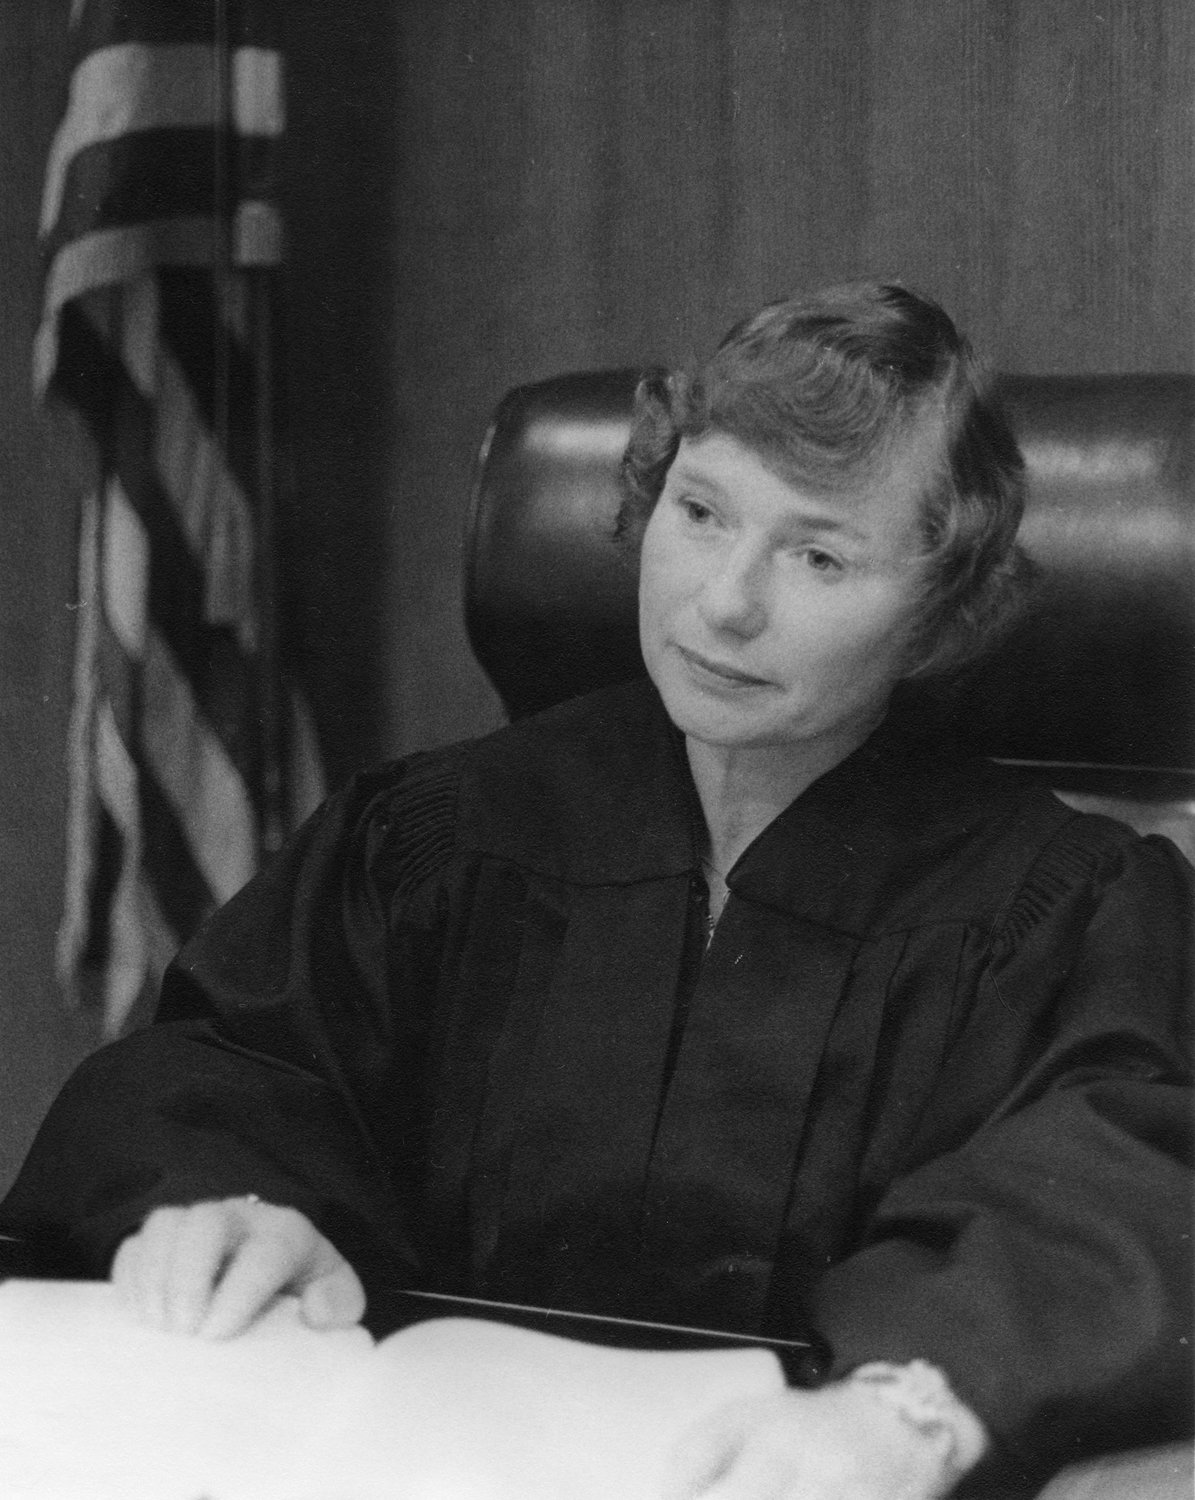 In this photo, circa 1980, Judge Carol Fuller is shown on the Superior Court Bench.